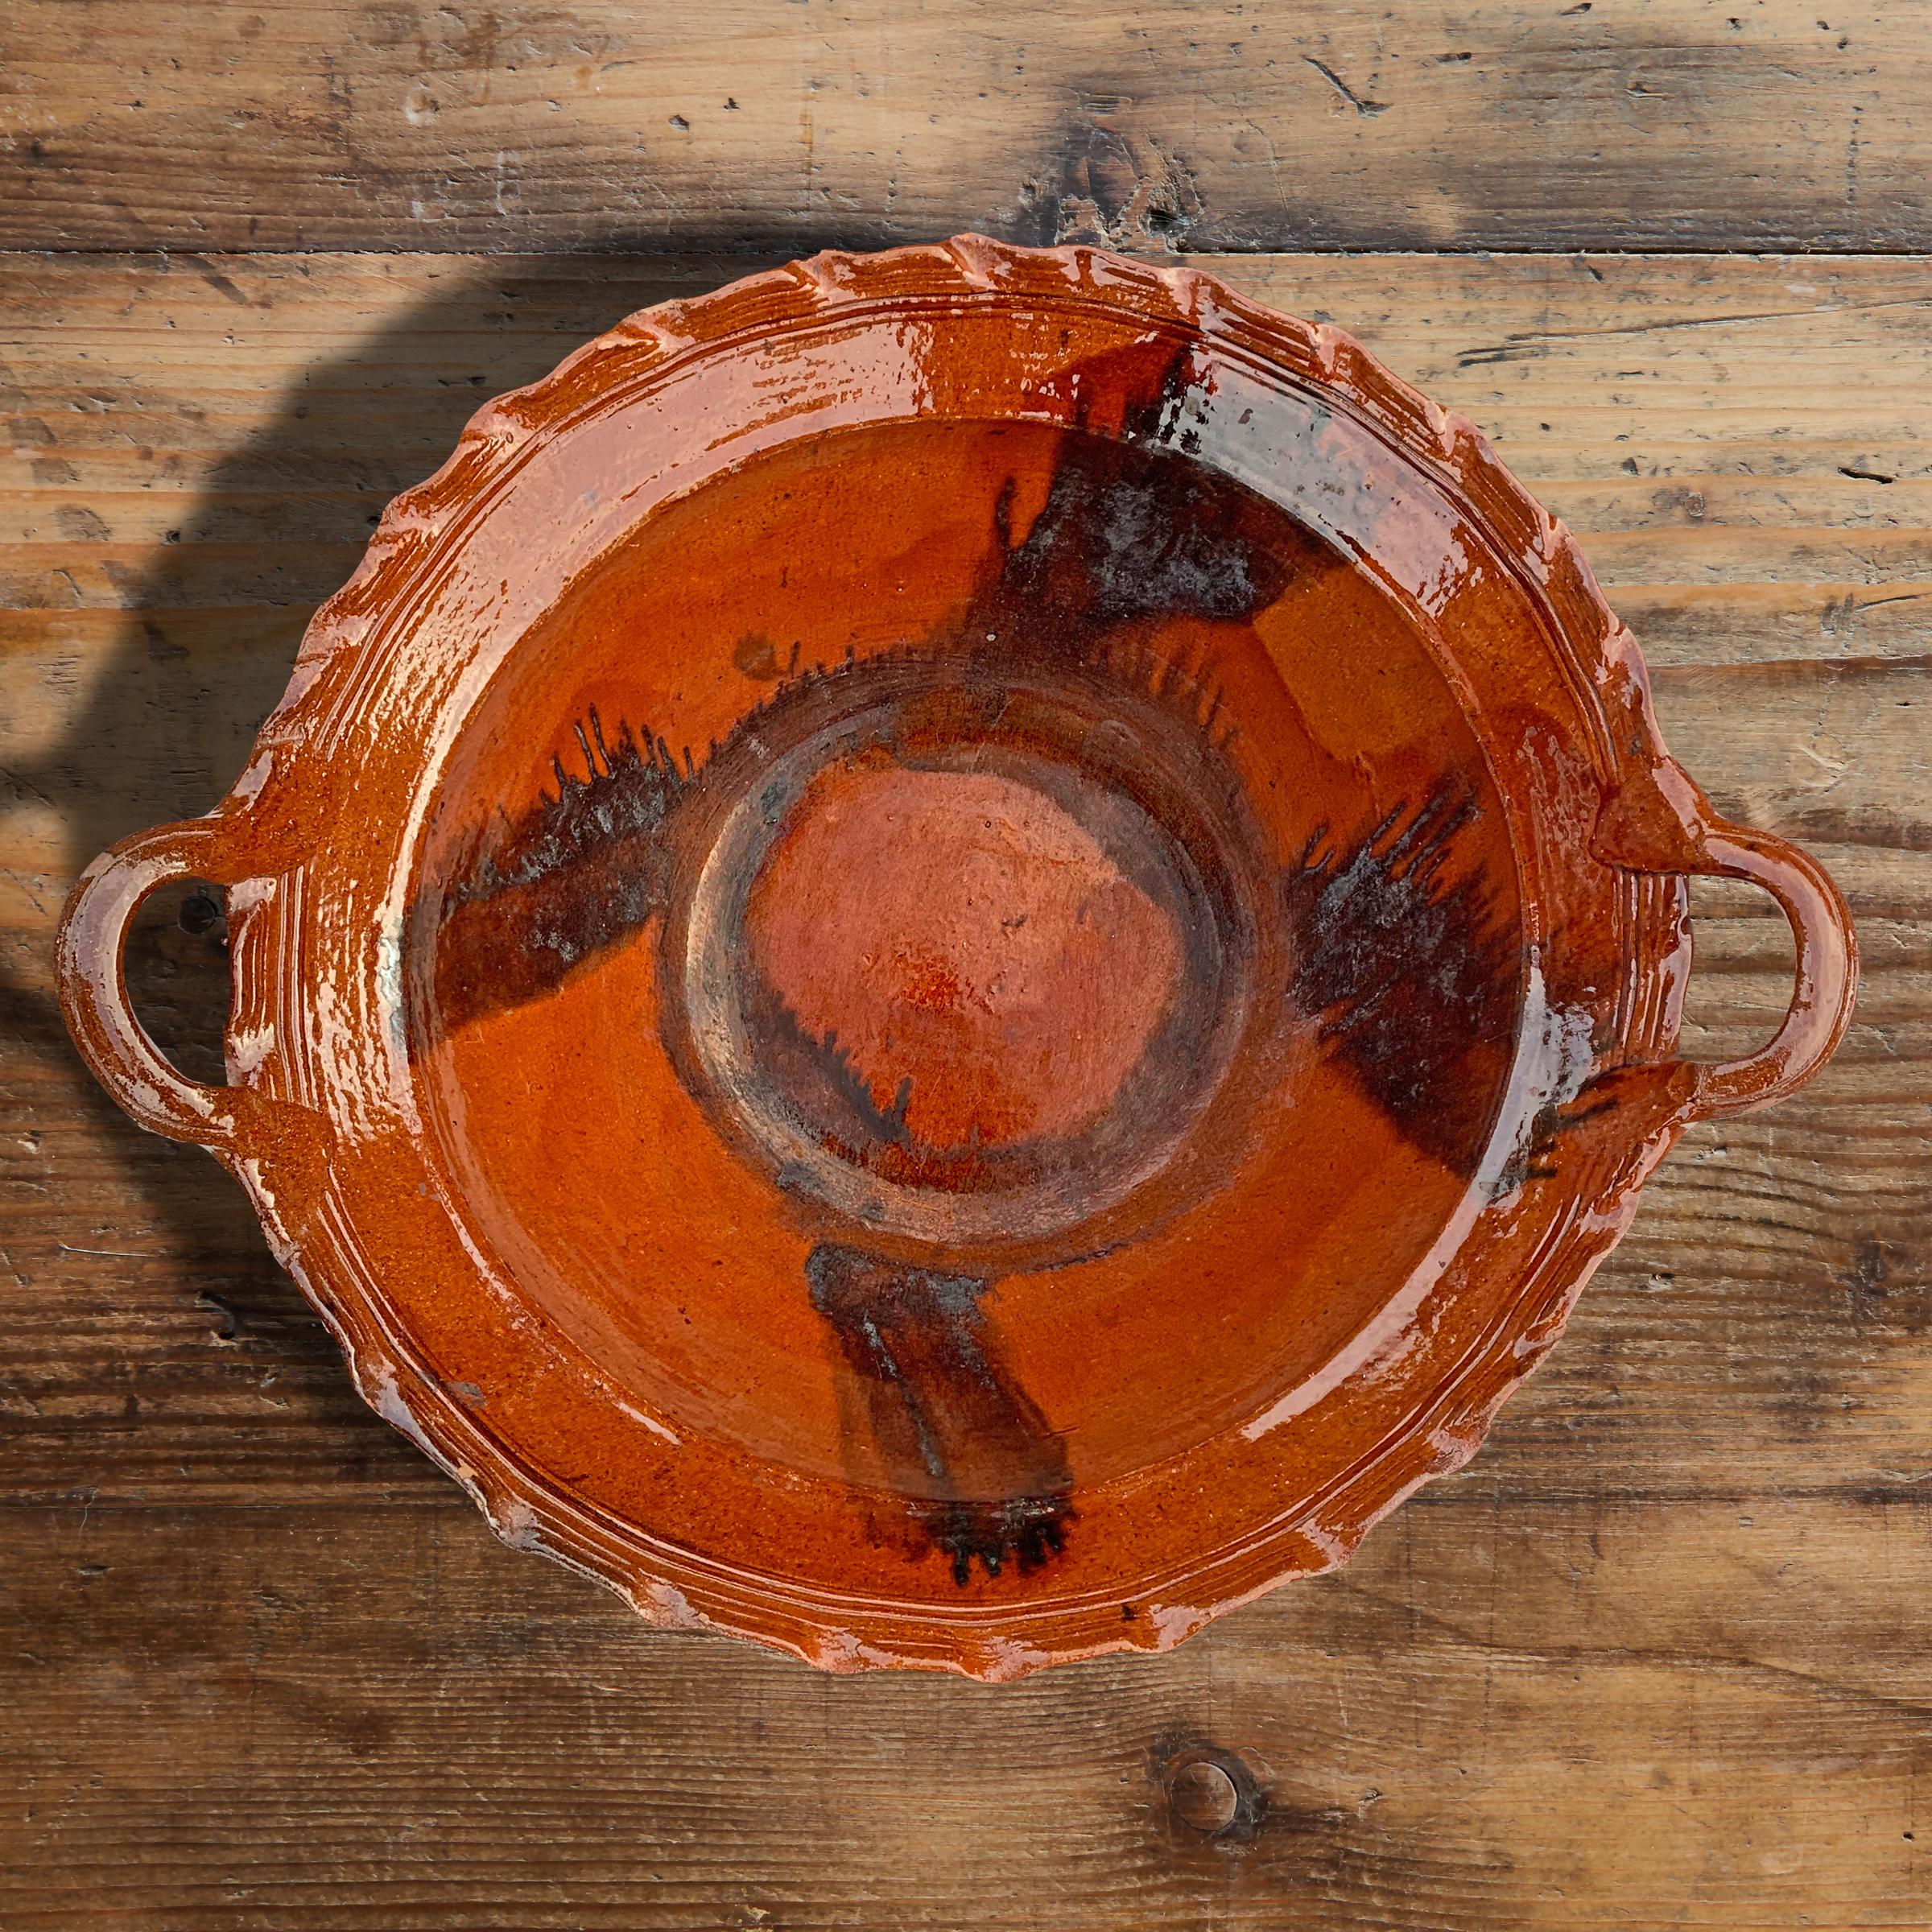 A massive vintage Mexican glazed terracotta bowl with two applied handles and a beautiful drip glazed pattern on the interior. The exterior is unglazed. Perfect for filling with fruit and vegetables on your kitchen island or for serving a salad at